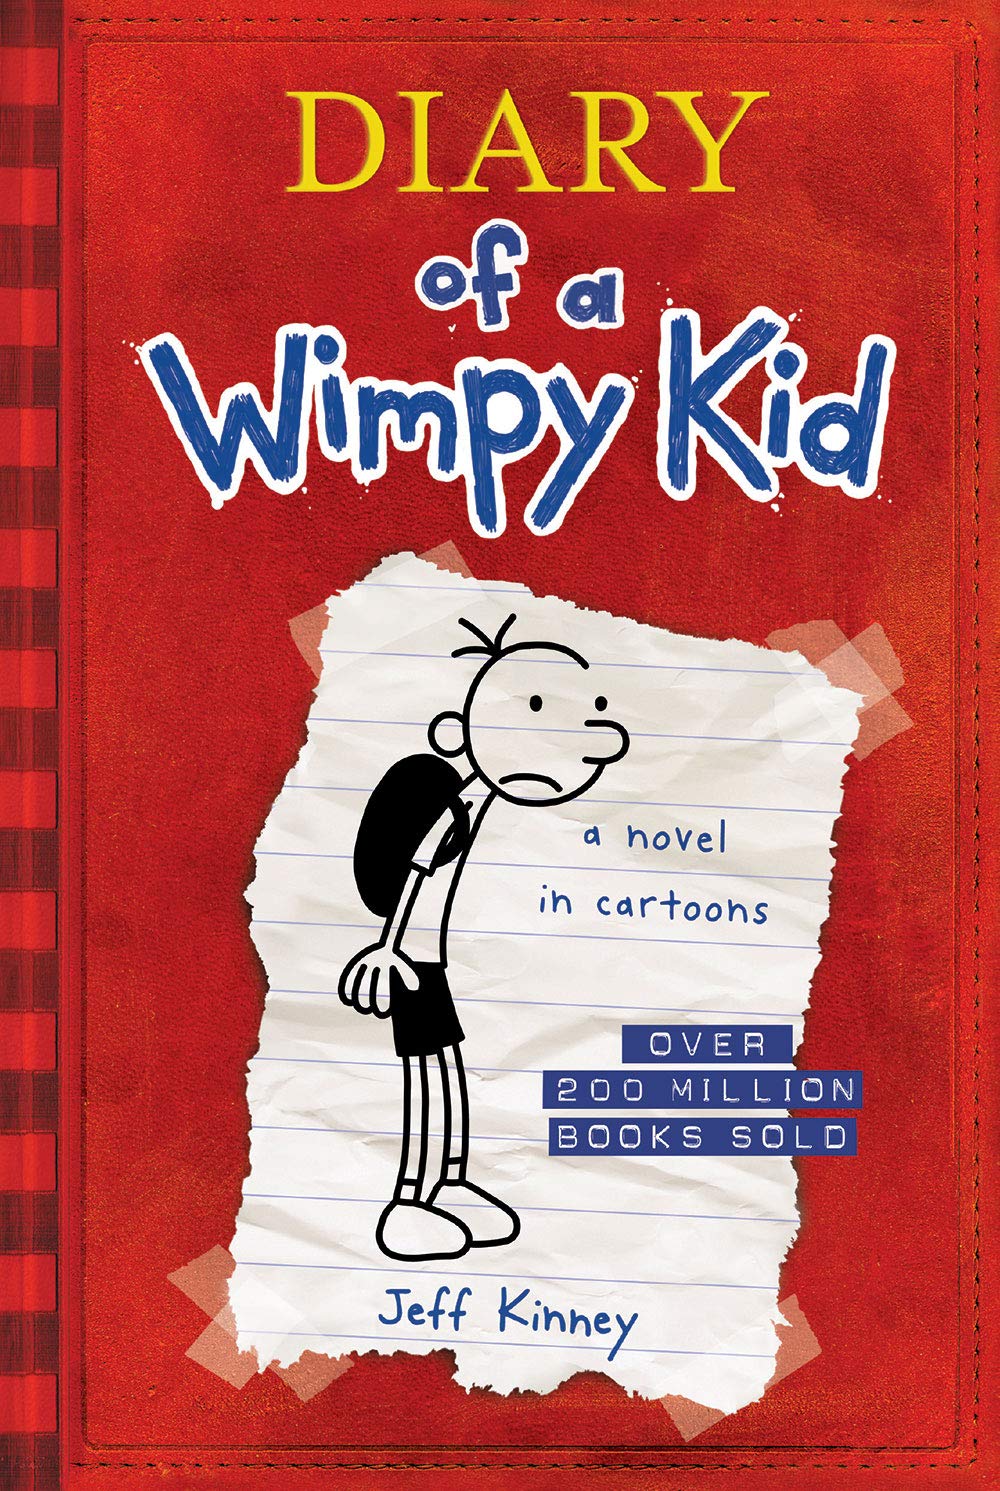 Diary of a Wimpy Kid Hardcover Volume 1 Diary of a Wimpy Kid